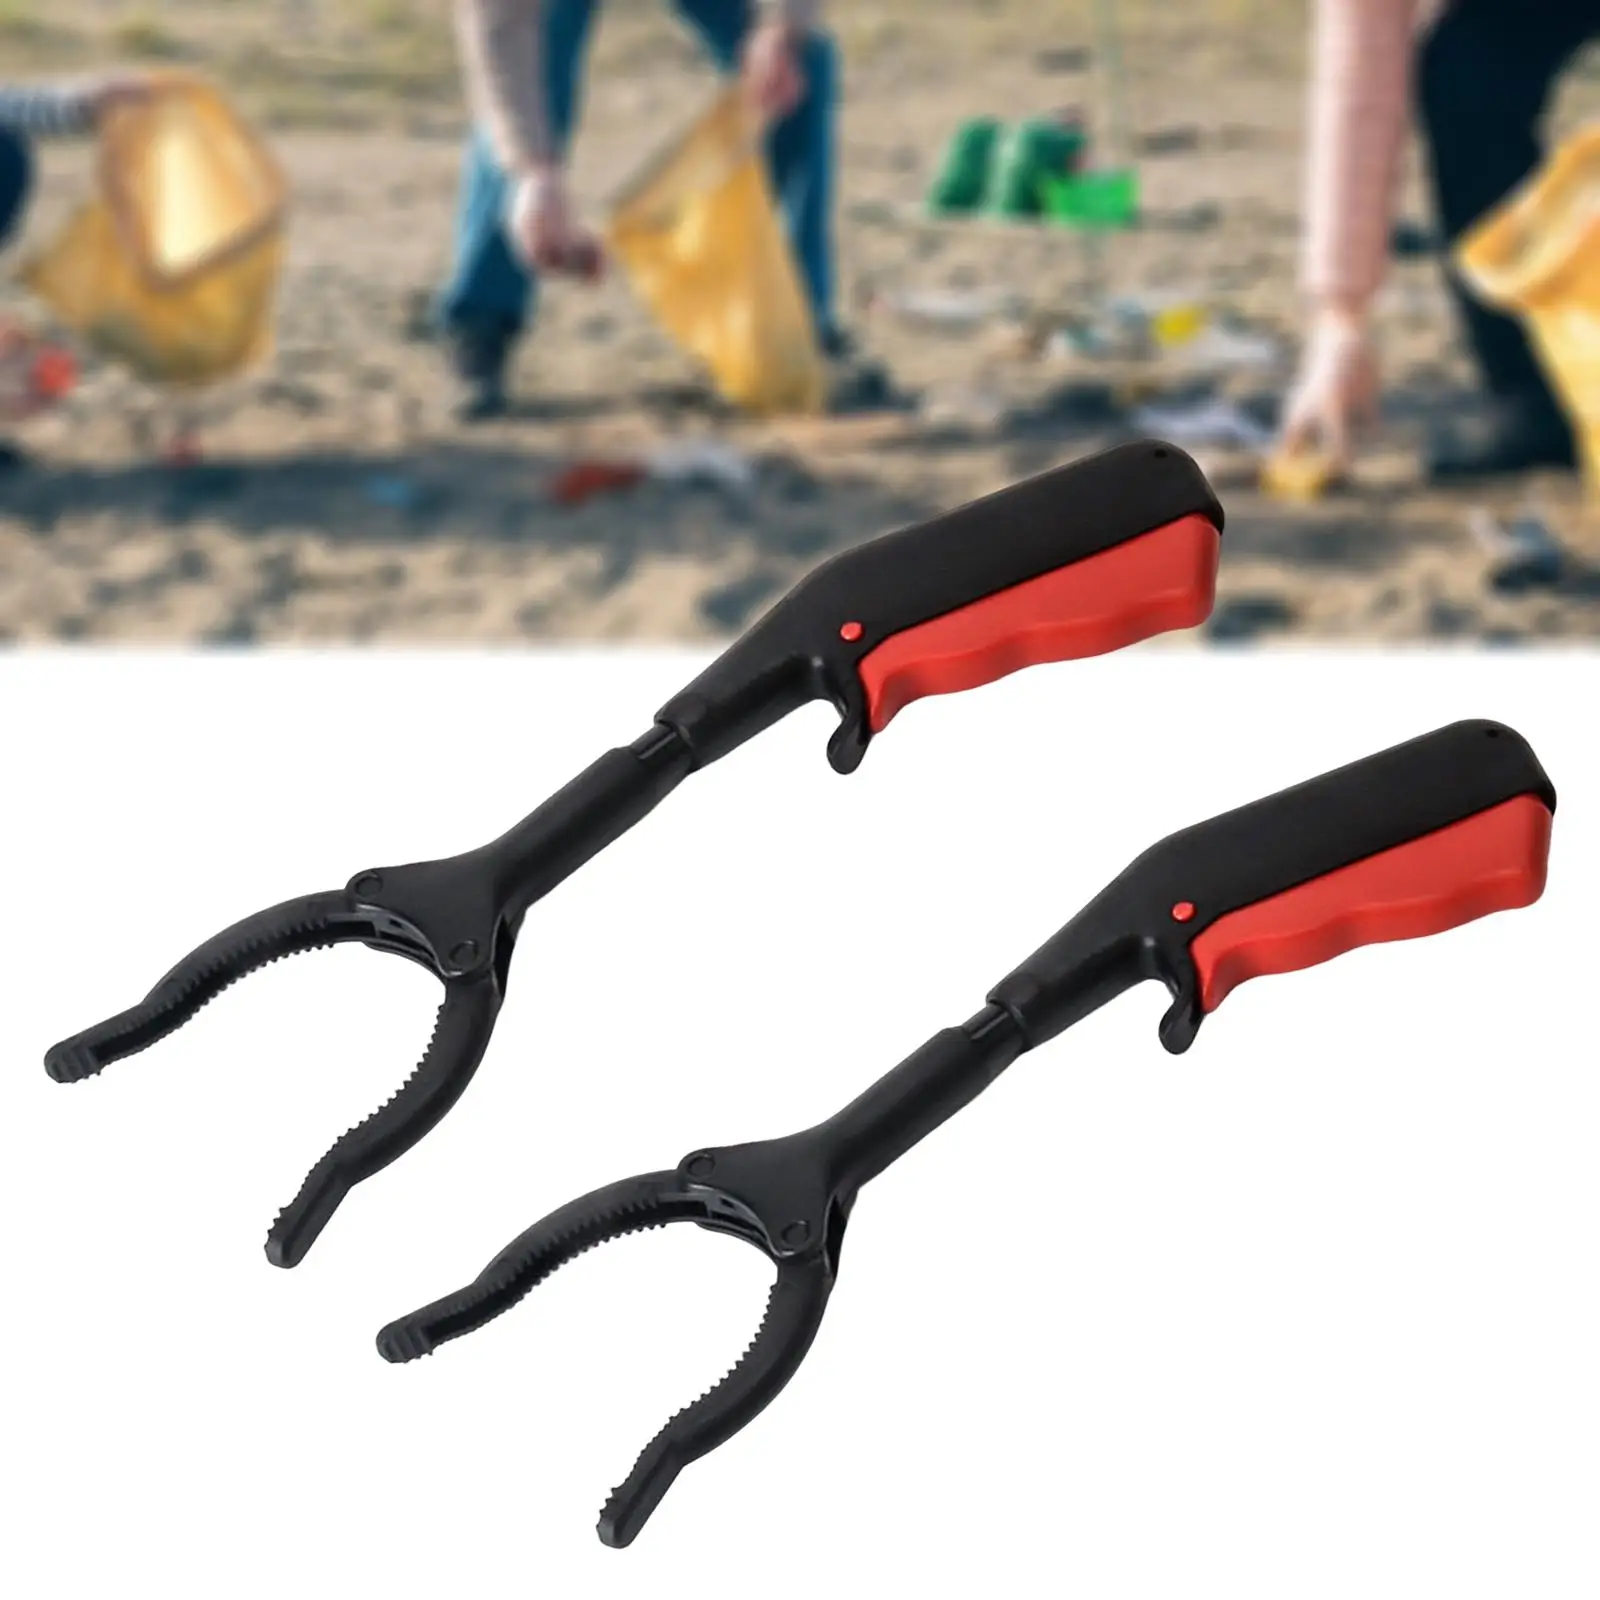 Grabber Tool Litter Picker Trash Claw Grabber Tool Pickup Tool Reaching Aid Arm Gripper Reacher Tool for Outdoor Lawn yard